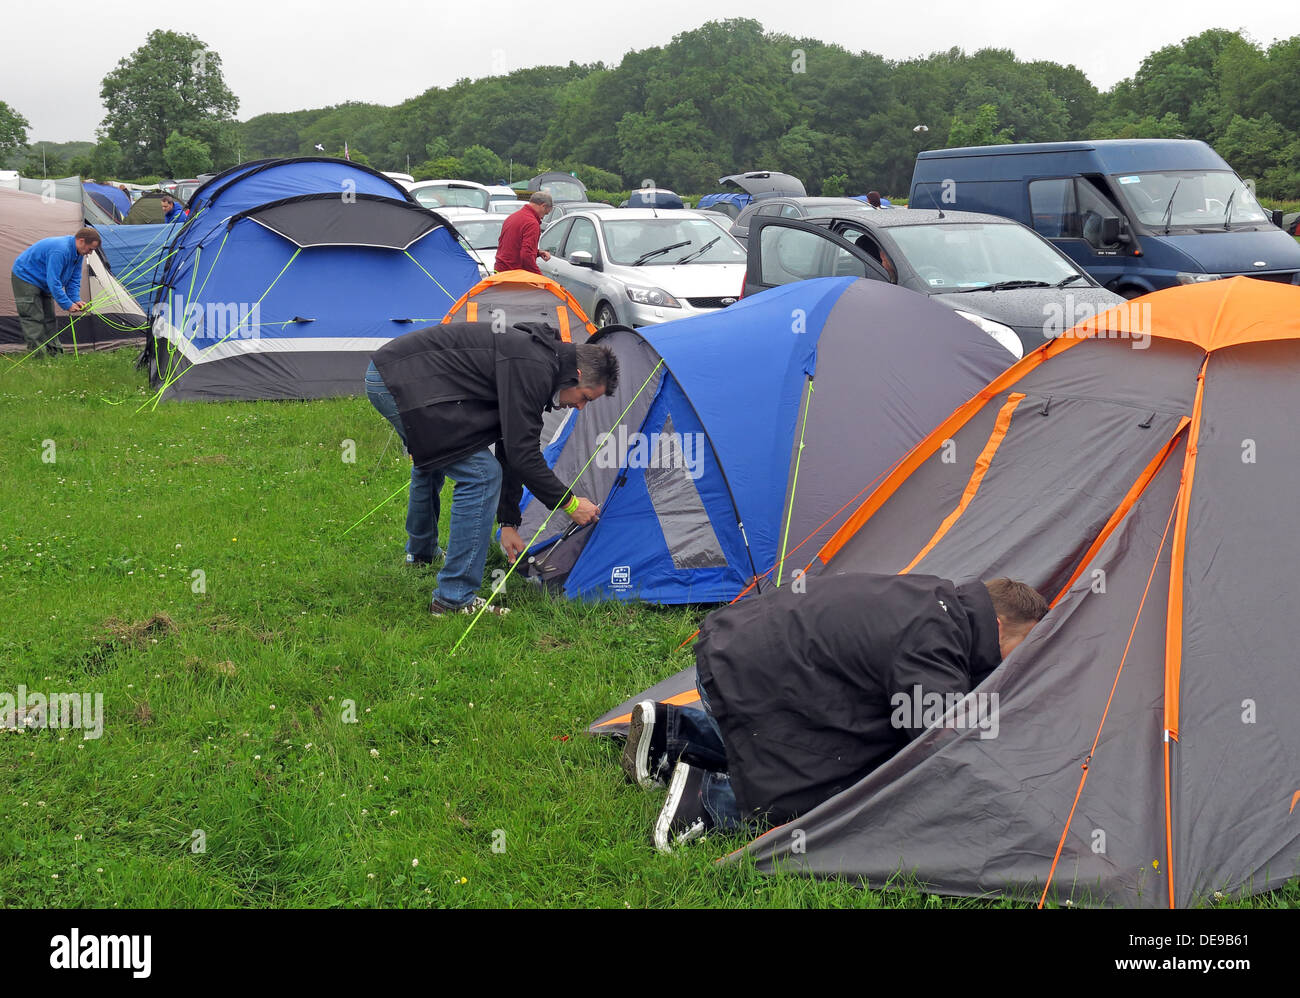 Happy campers erecting a tent at a festival or sporting event (F1 Grand Prix) Stock Photo